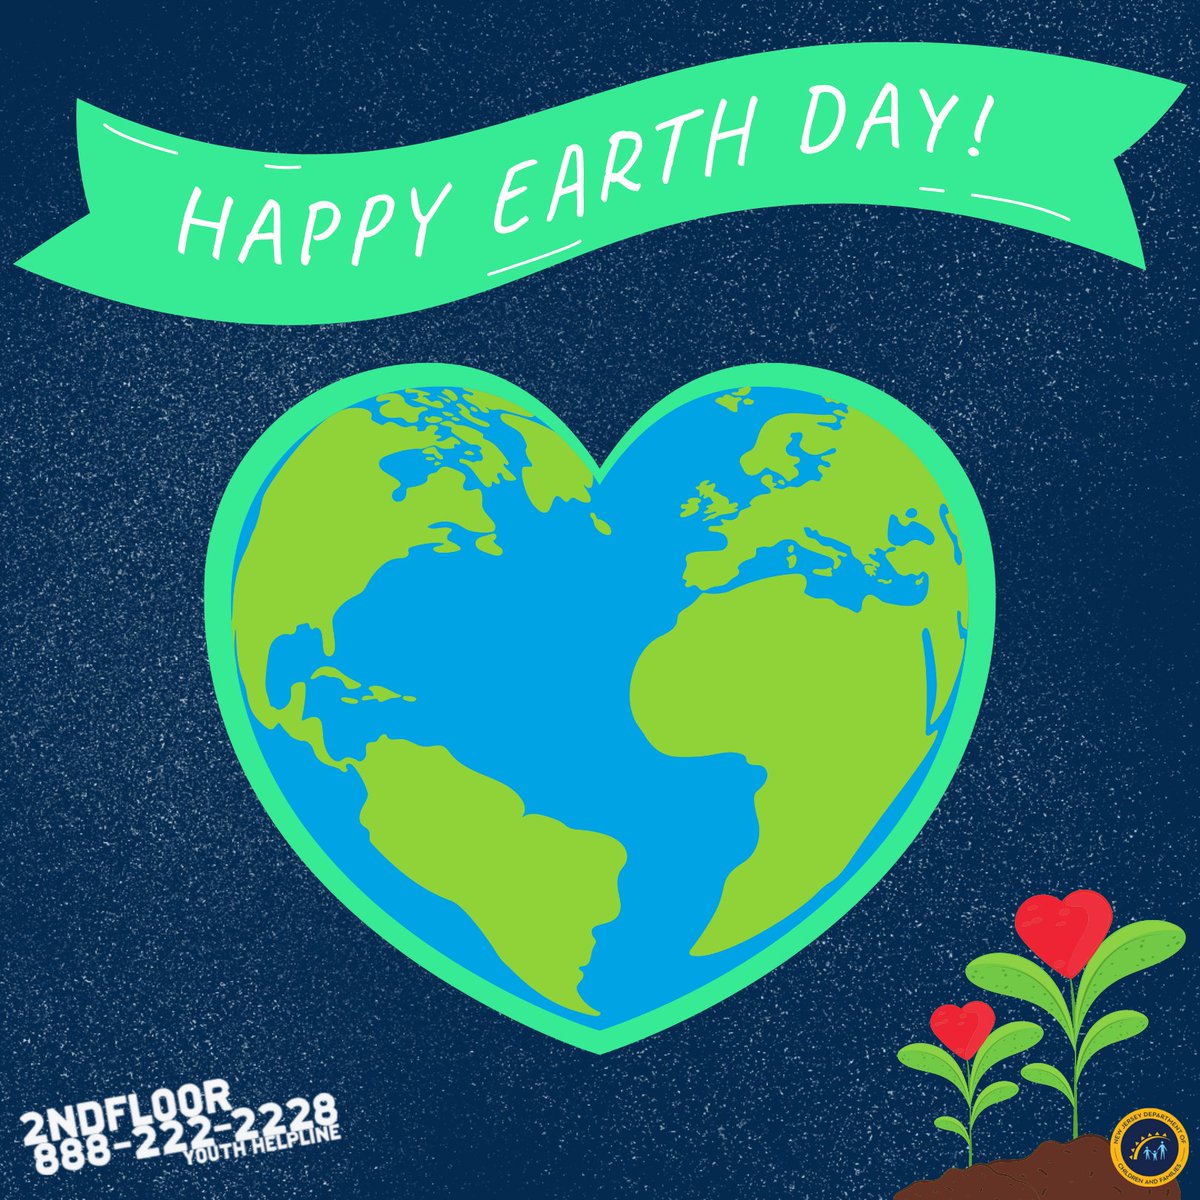 As we celebrate #EarthDay and the positive impacts we can make towards a sustainable future, we also understand that climate anxiety is very real for many young people. If stress about the future is affecting your daily life, we are here for you. Let’s talk about it.